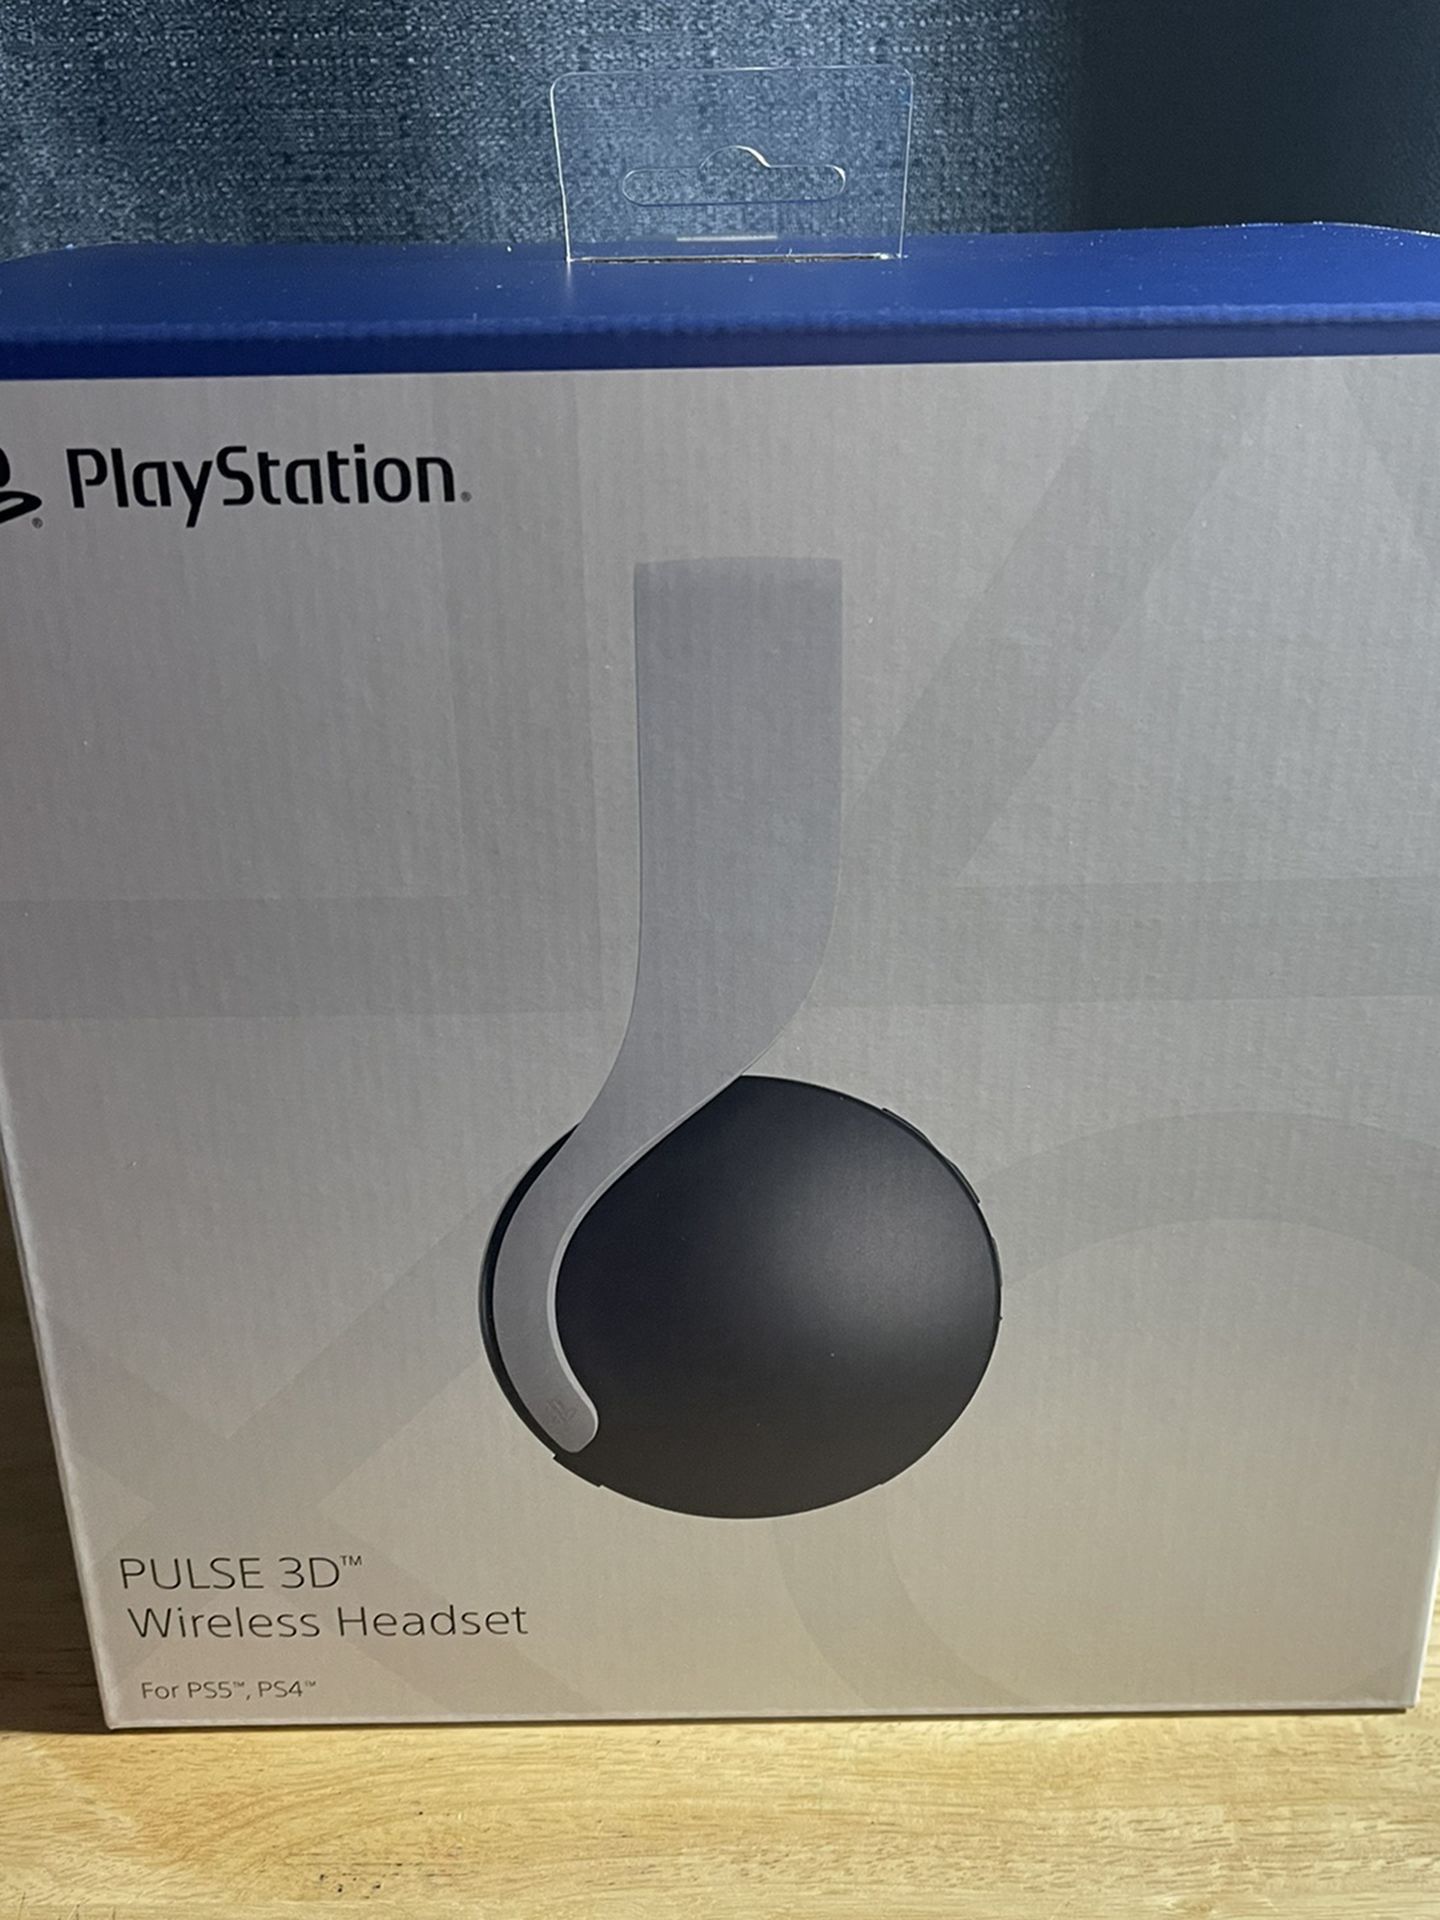 Sony PS5 / PS4 Pulse 3D Wireless Headset - NEW IN BOX